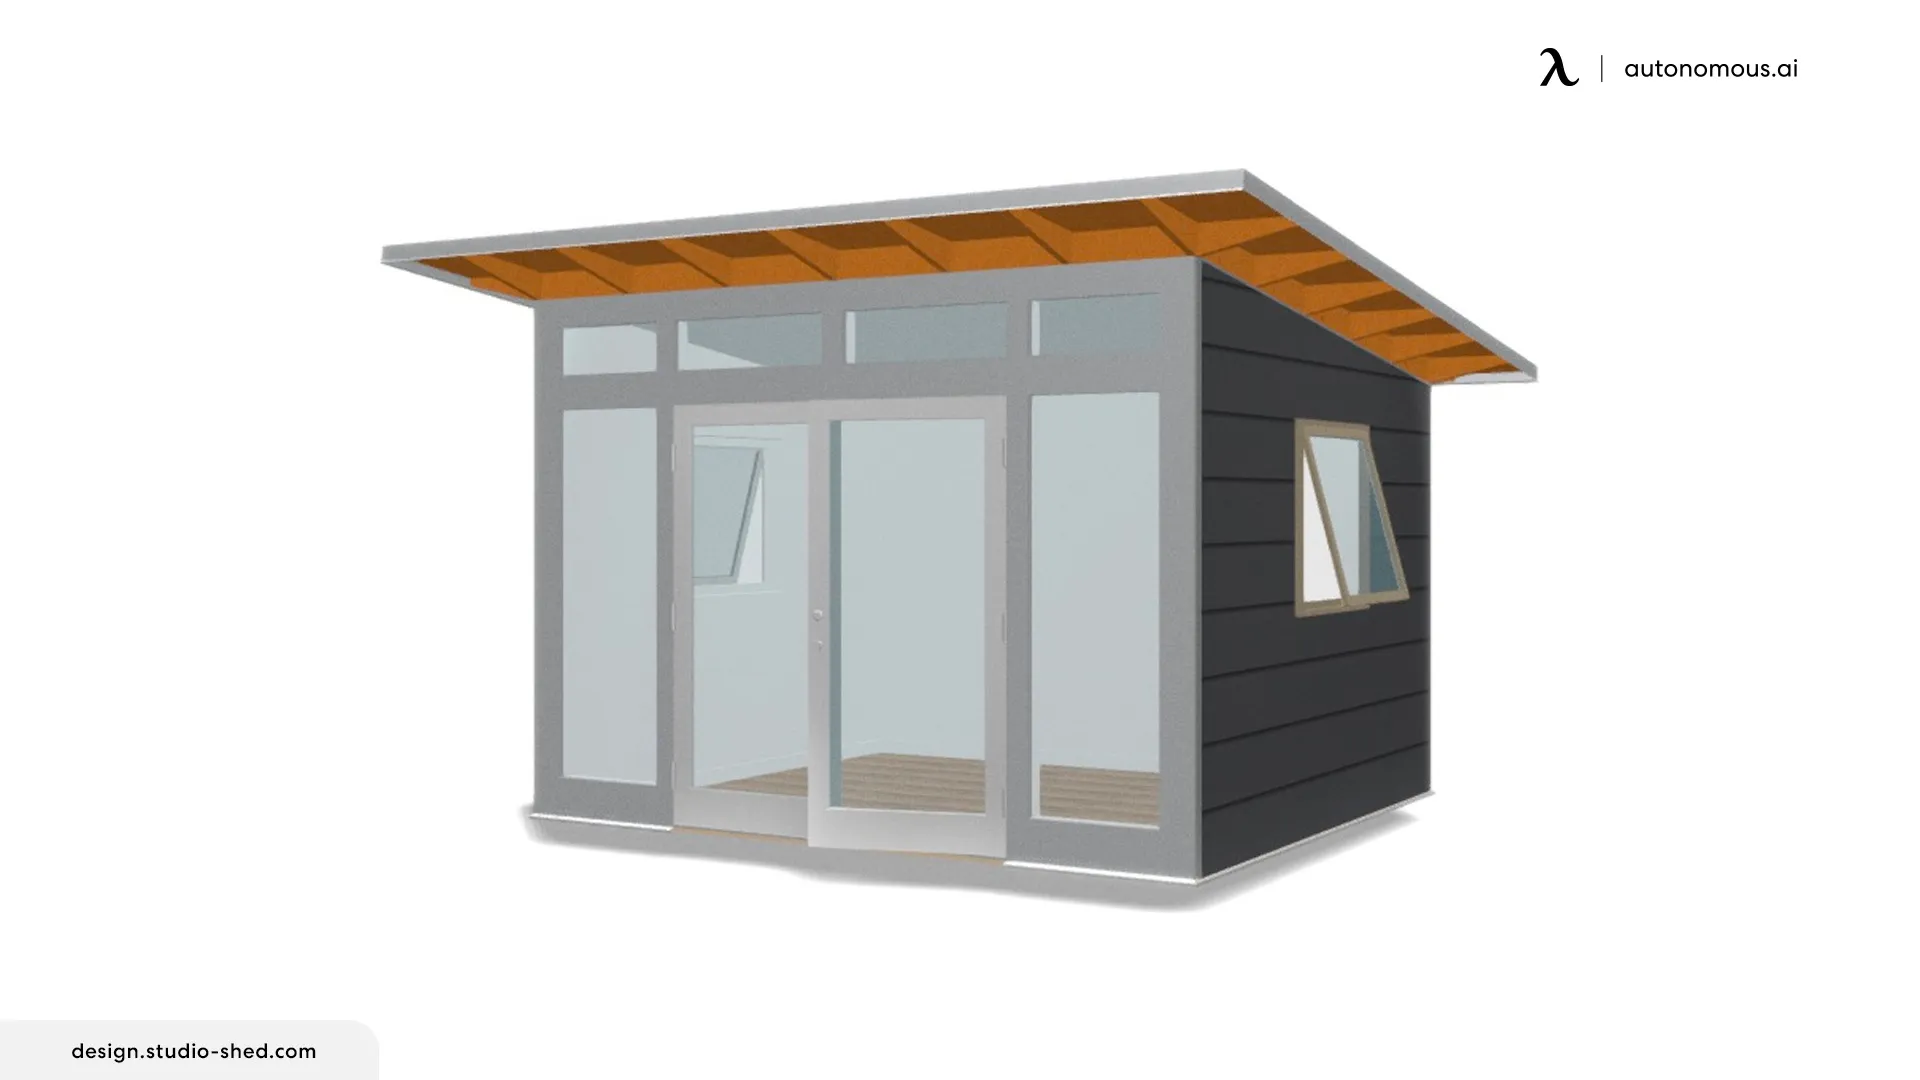 Signature Series Office Shed